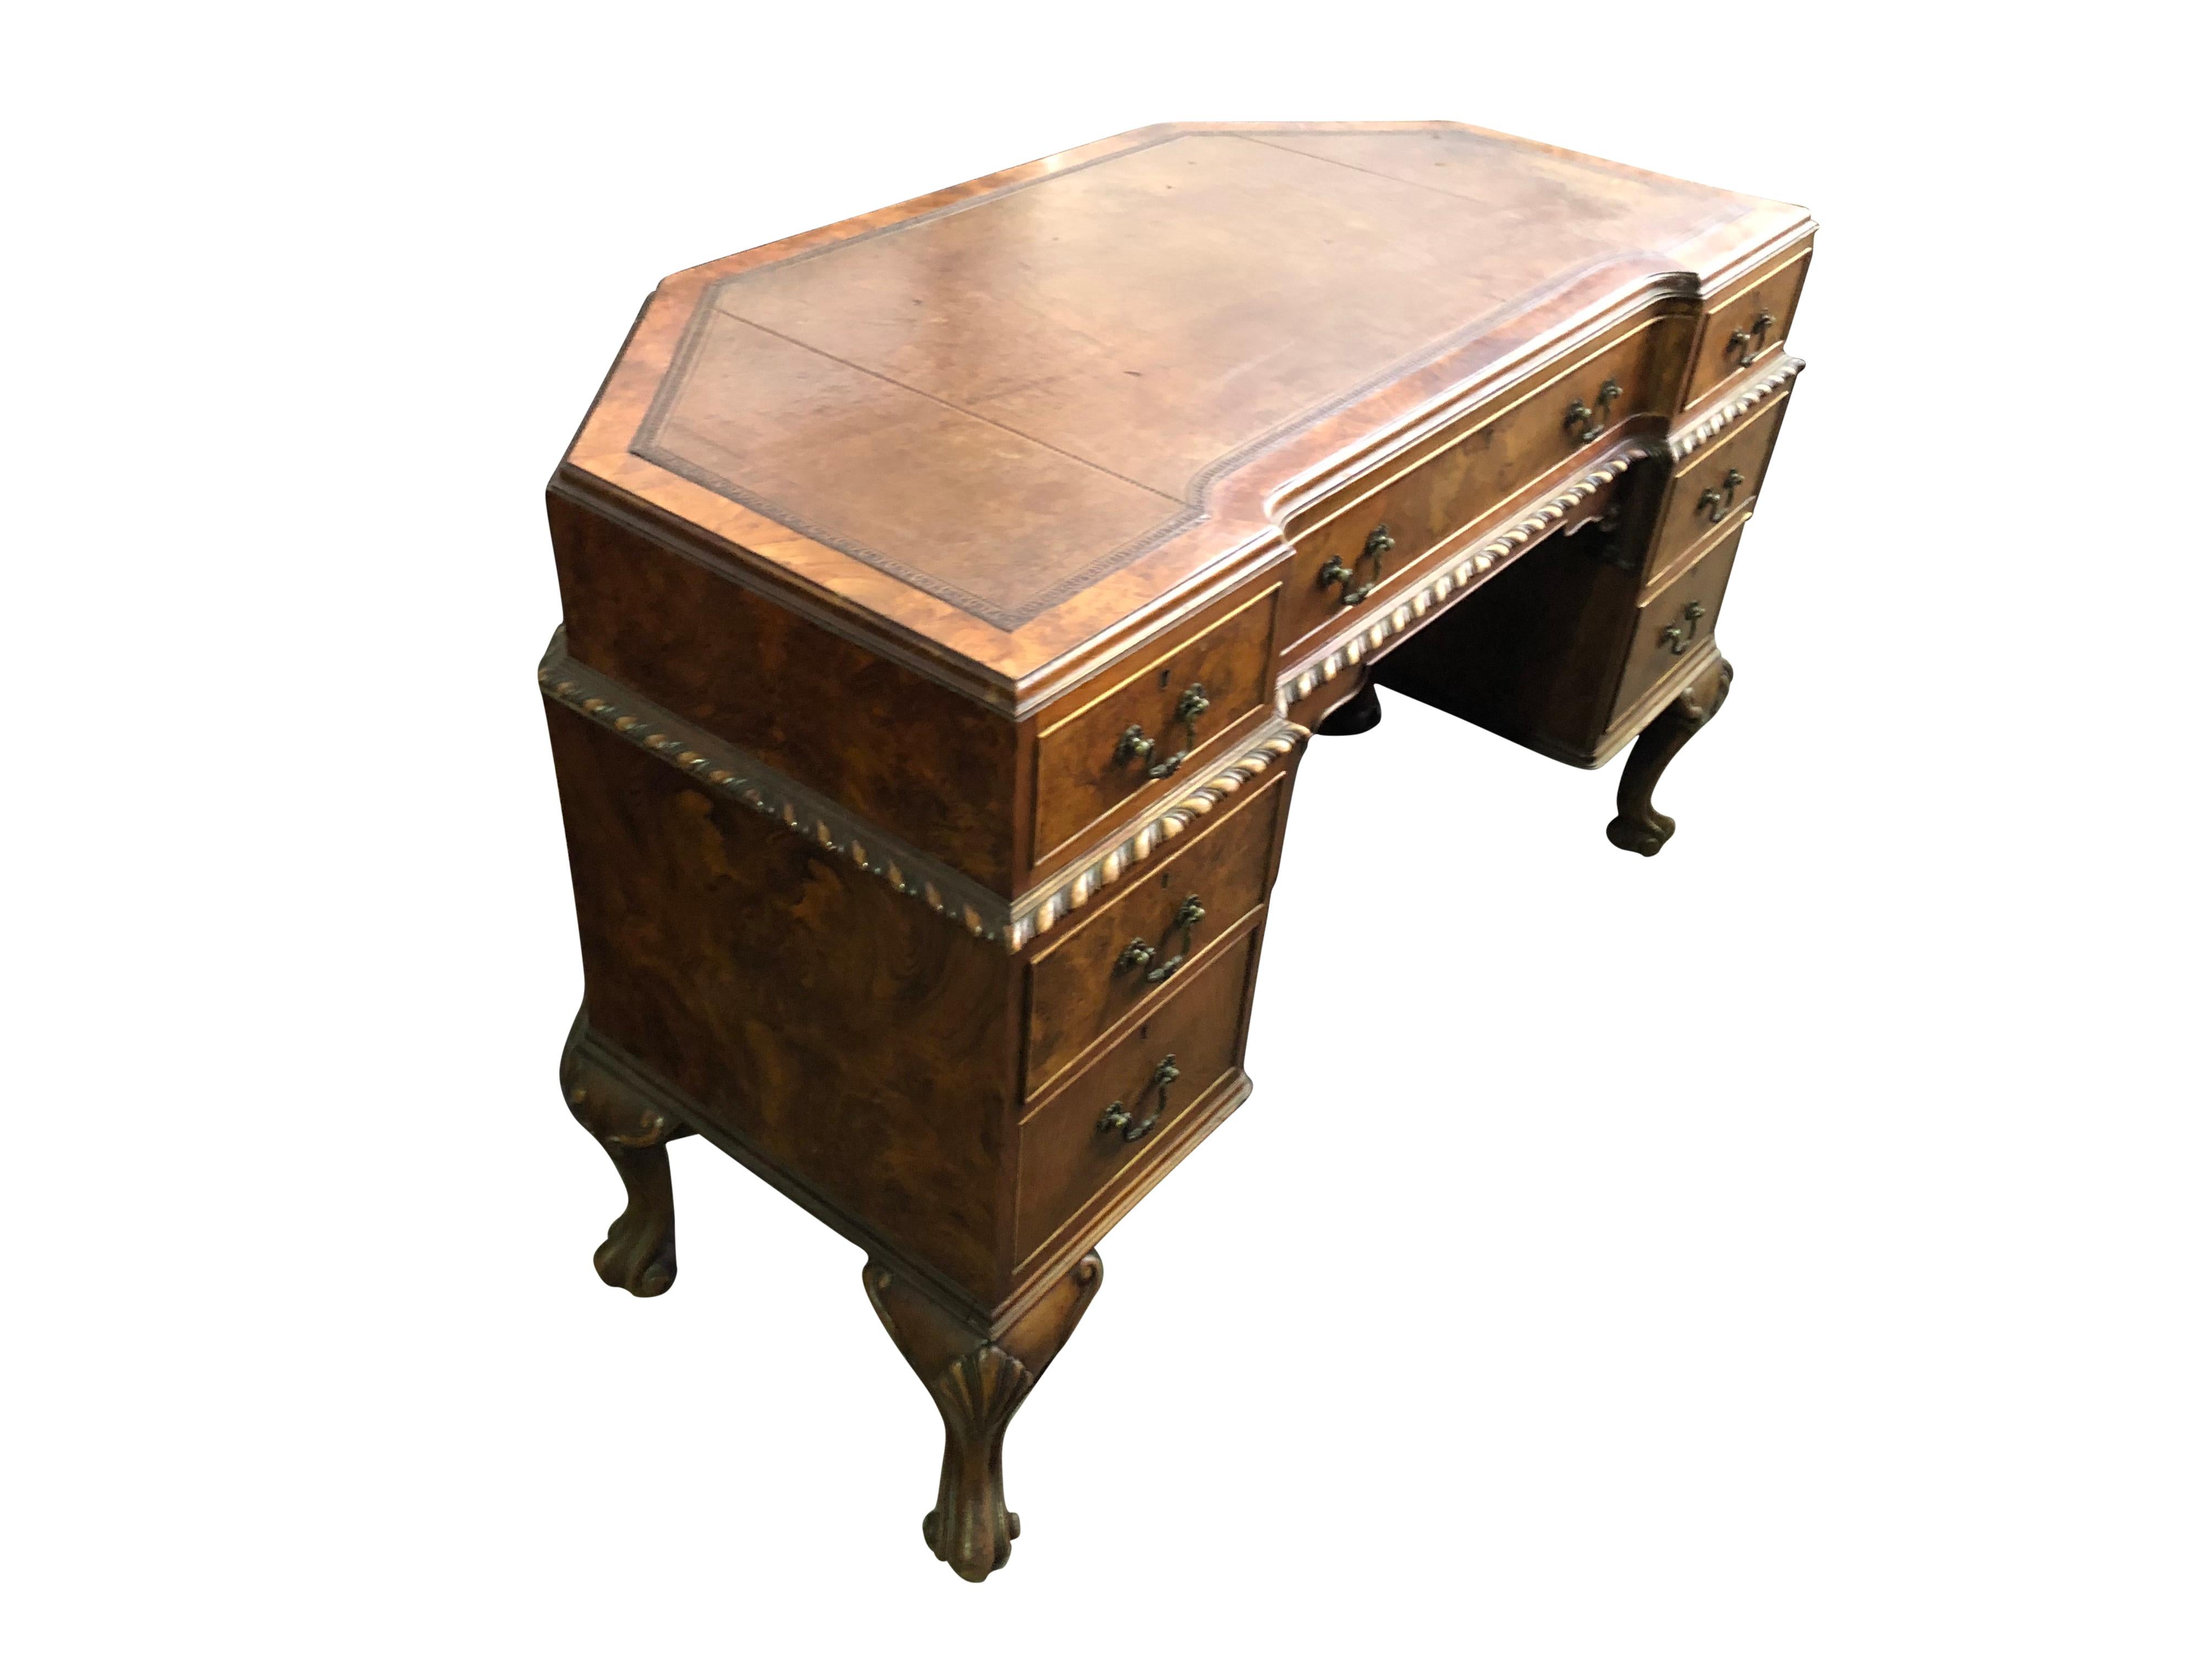 Hand-Carved 19th Century Victorian Walnut Desk with Leather Top